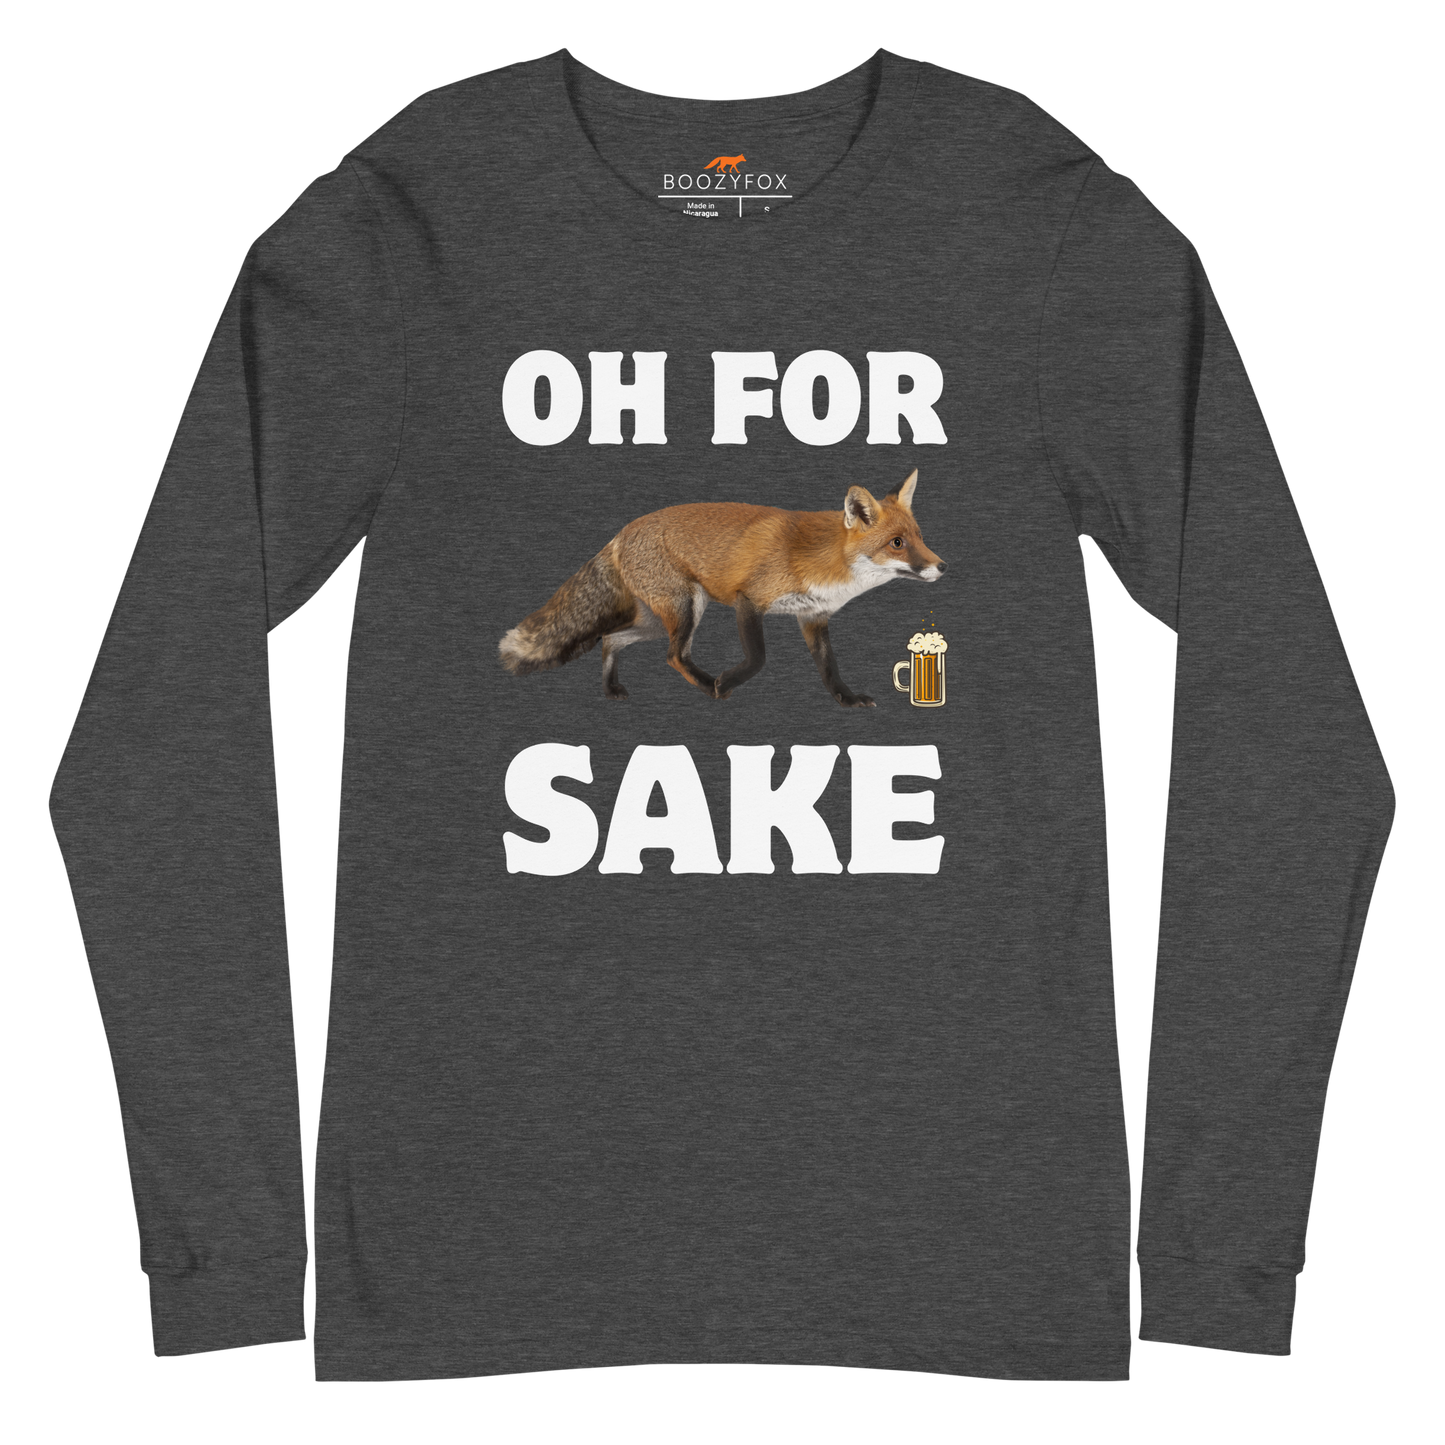 Dark Grey Heather Fox Long Sleeve Tee featuring a Oh For Fox Sake graphic on the chest - Funny Fox Long Sleeve Graphic Tees - Boozy Fox